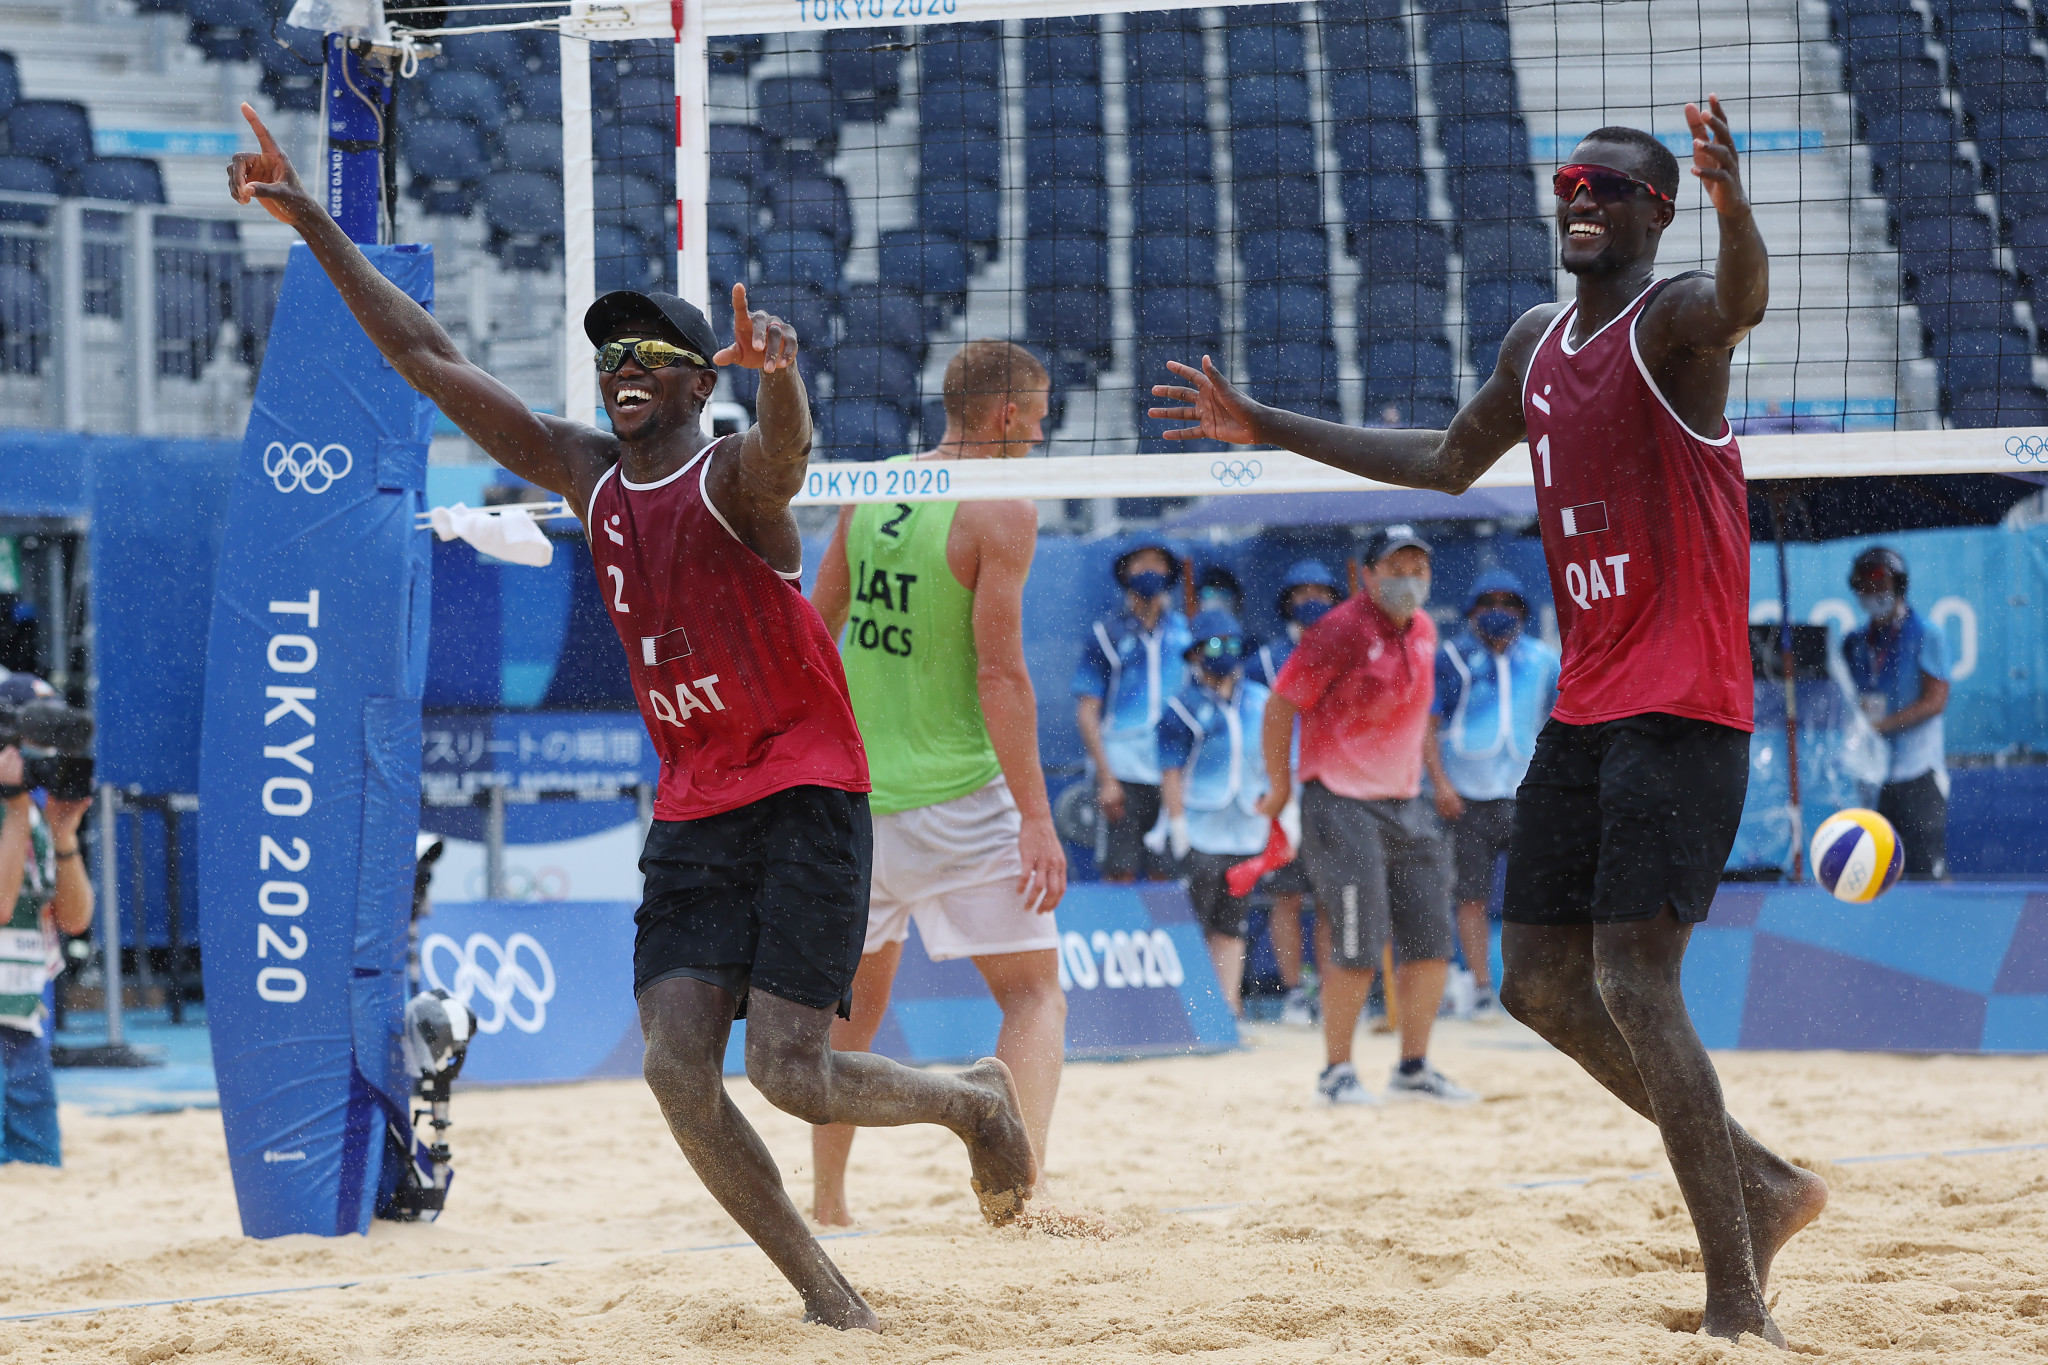 Qataris Younousse and Tijan set to play for gold at Volleyball World Beach Pro Tour in Mexico 